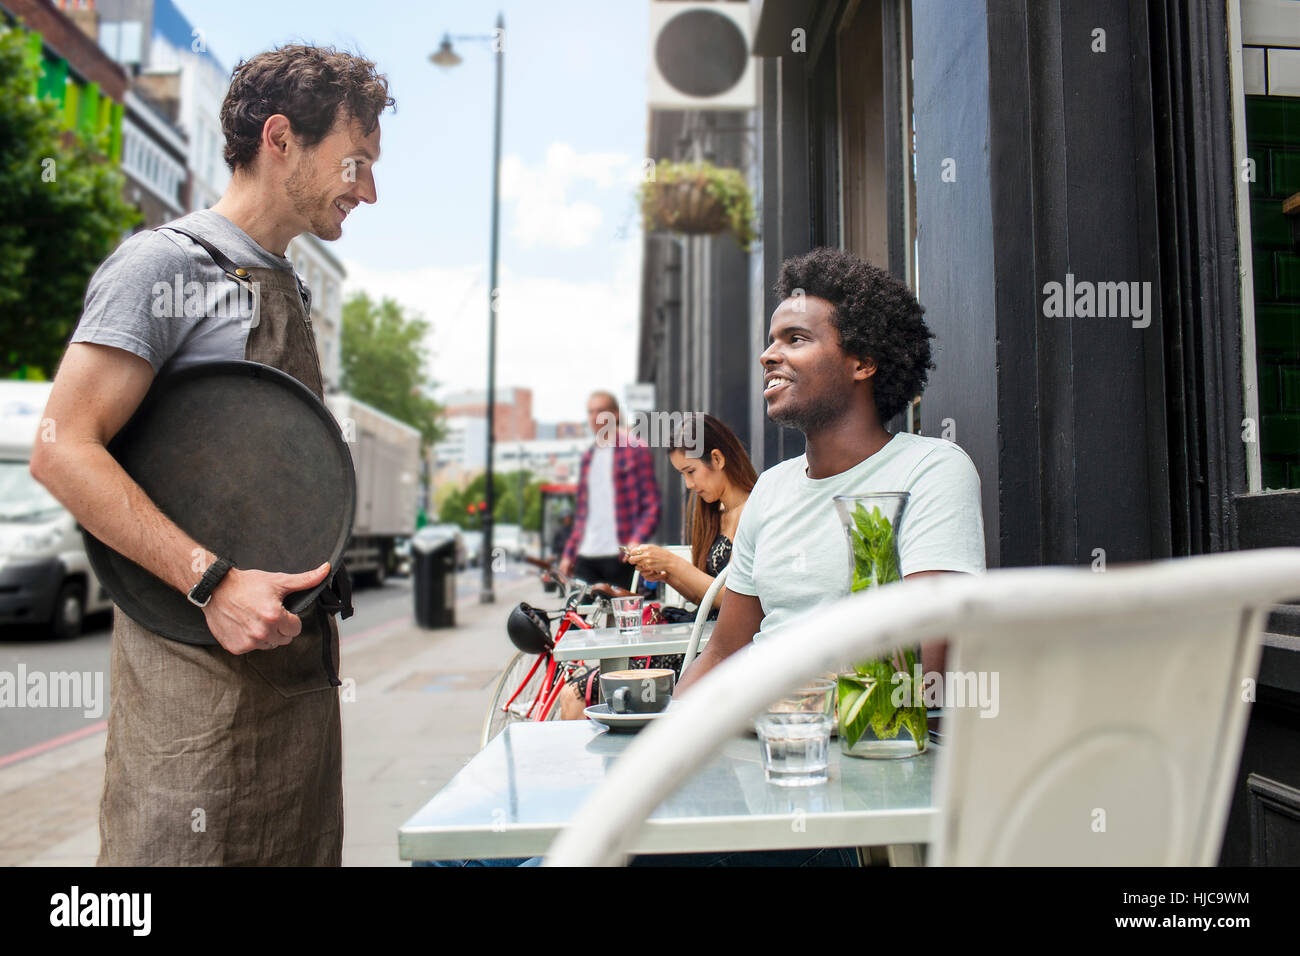 Waiter serving young man at city sidewalk cafe Stock Photo